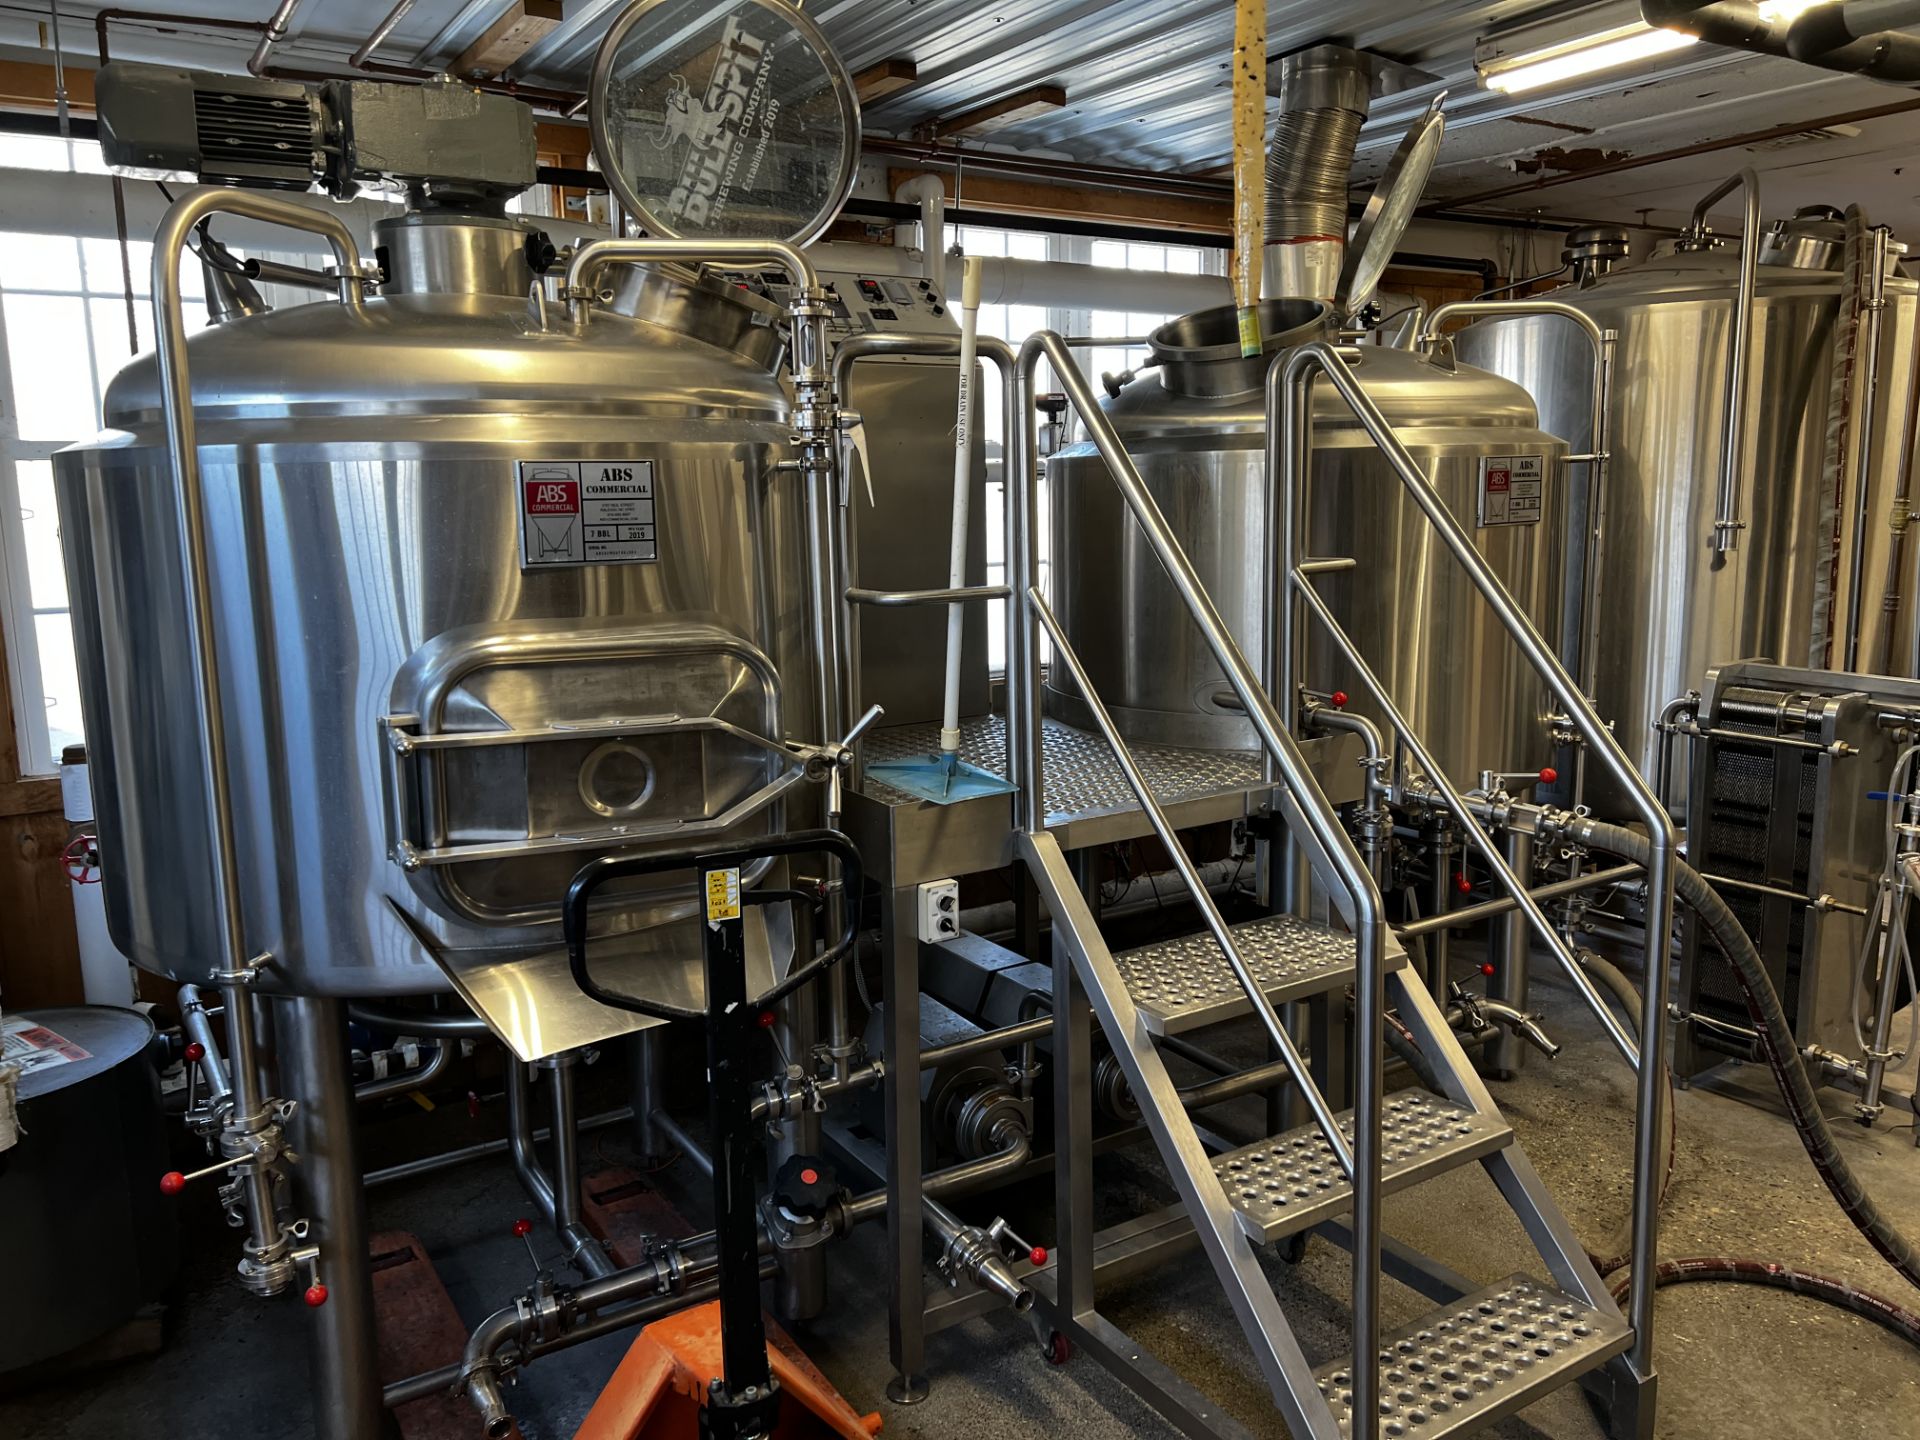 2019 ABS 7BBL Jacketed Brewhouse C/O: ABS DME 7BBL Mash Turn and 7BBL Steam Kettle, ABS Brew House